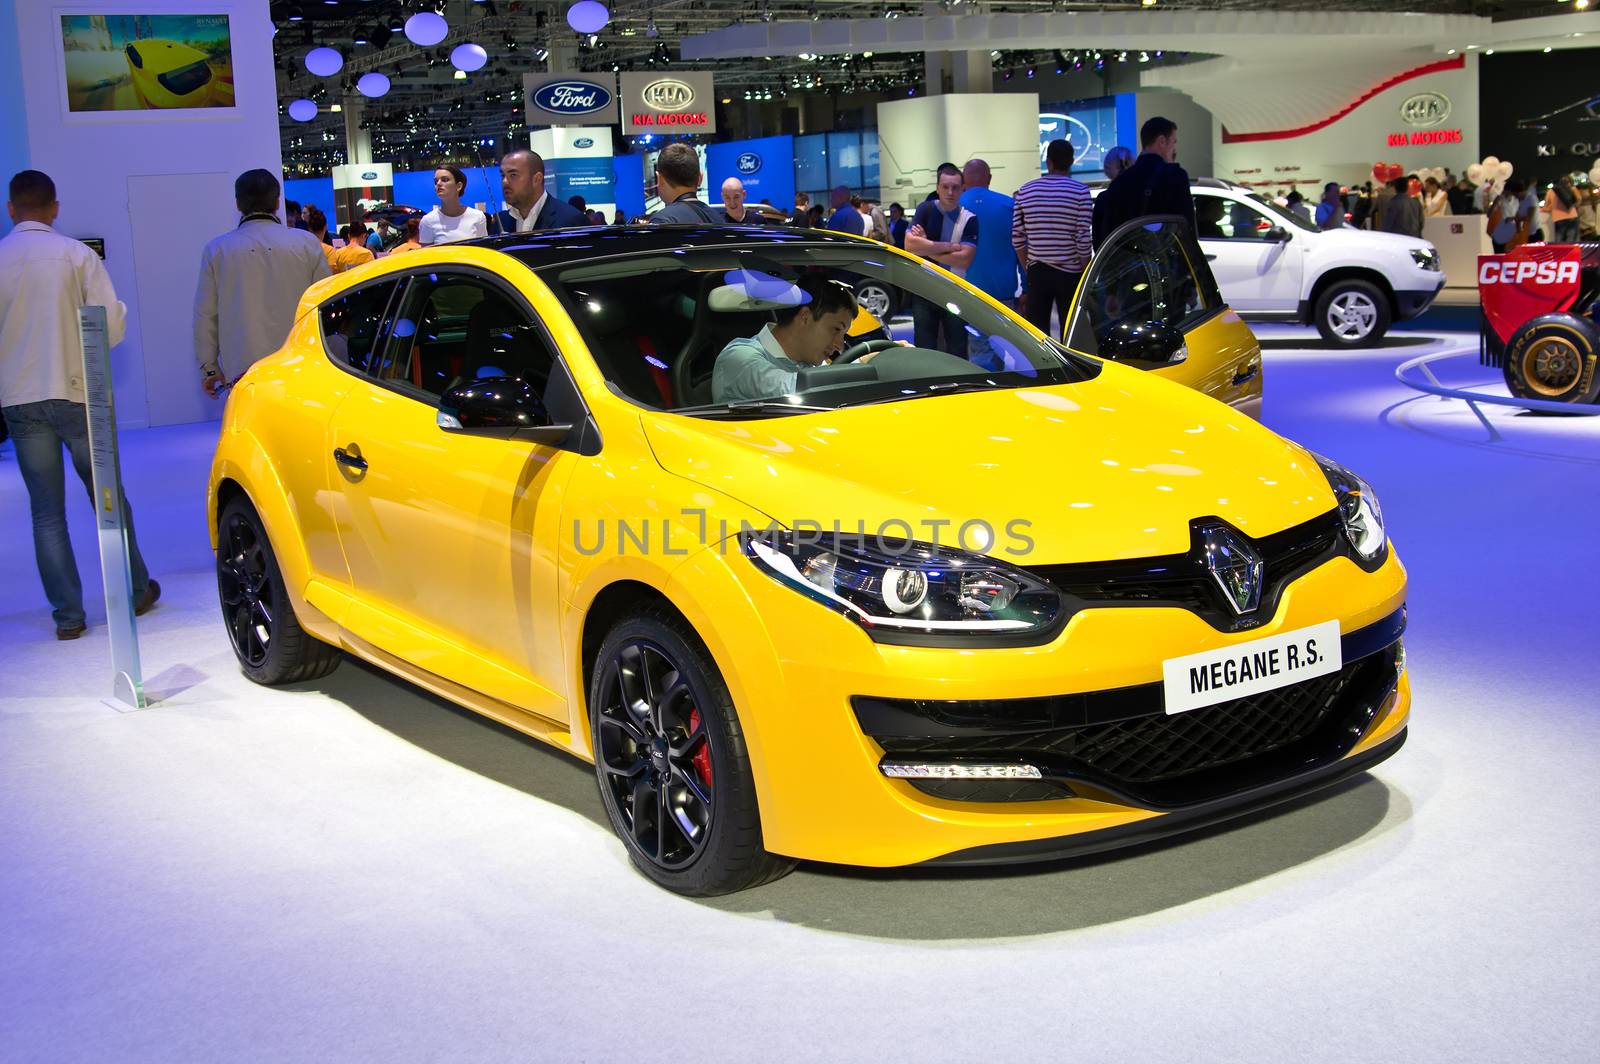 MOSCOW-SEPTEMBER 2: Renault Megane RS at the Moscow International Automobile Salon on September 2, 2014 in Moscow, Russia